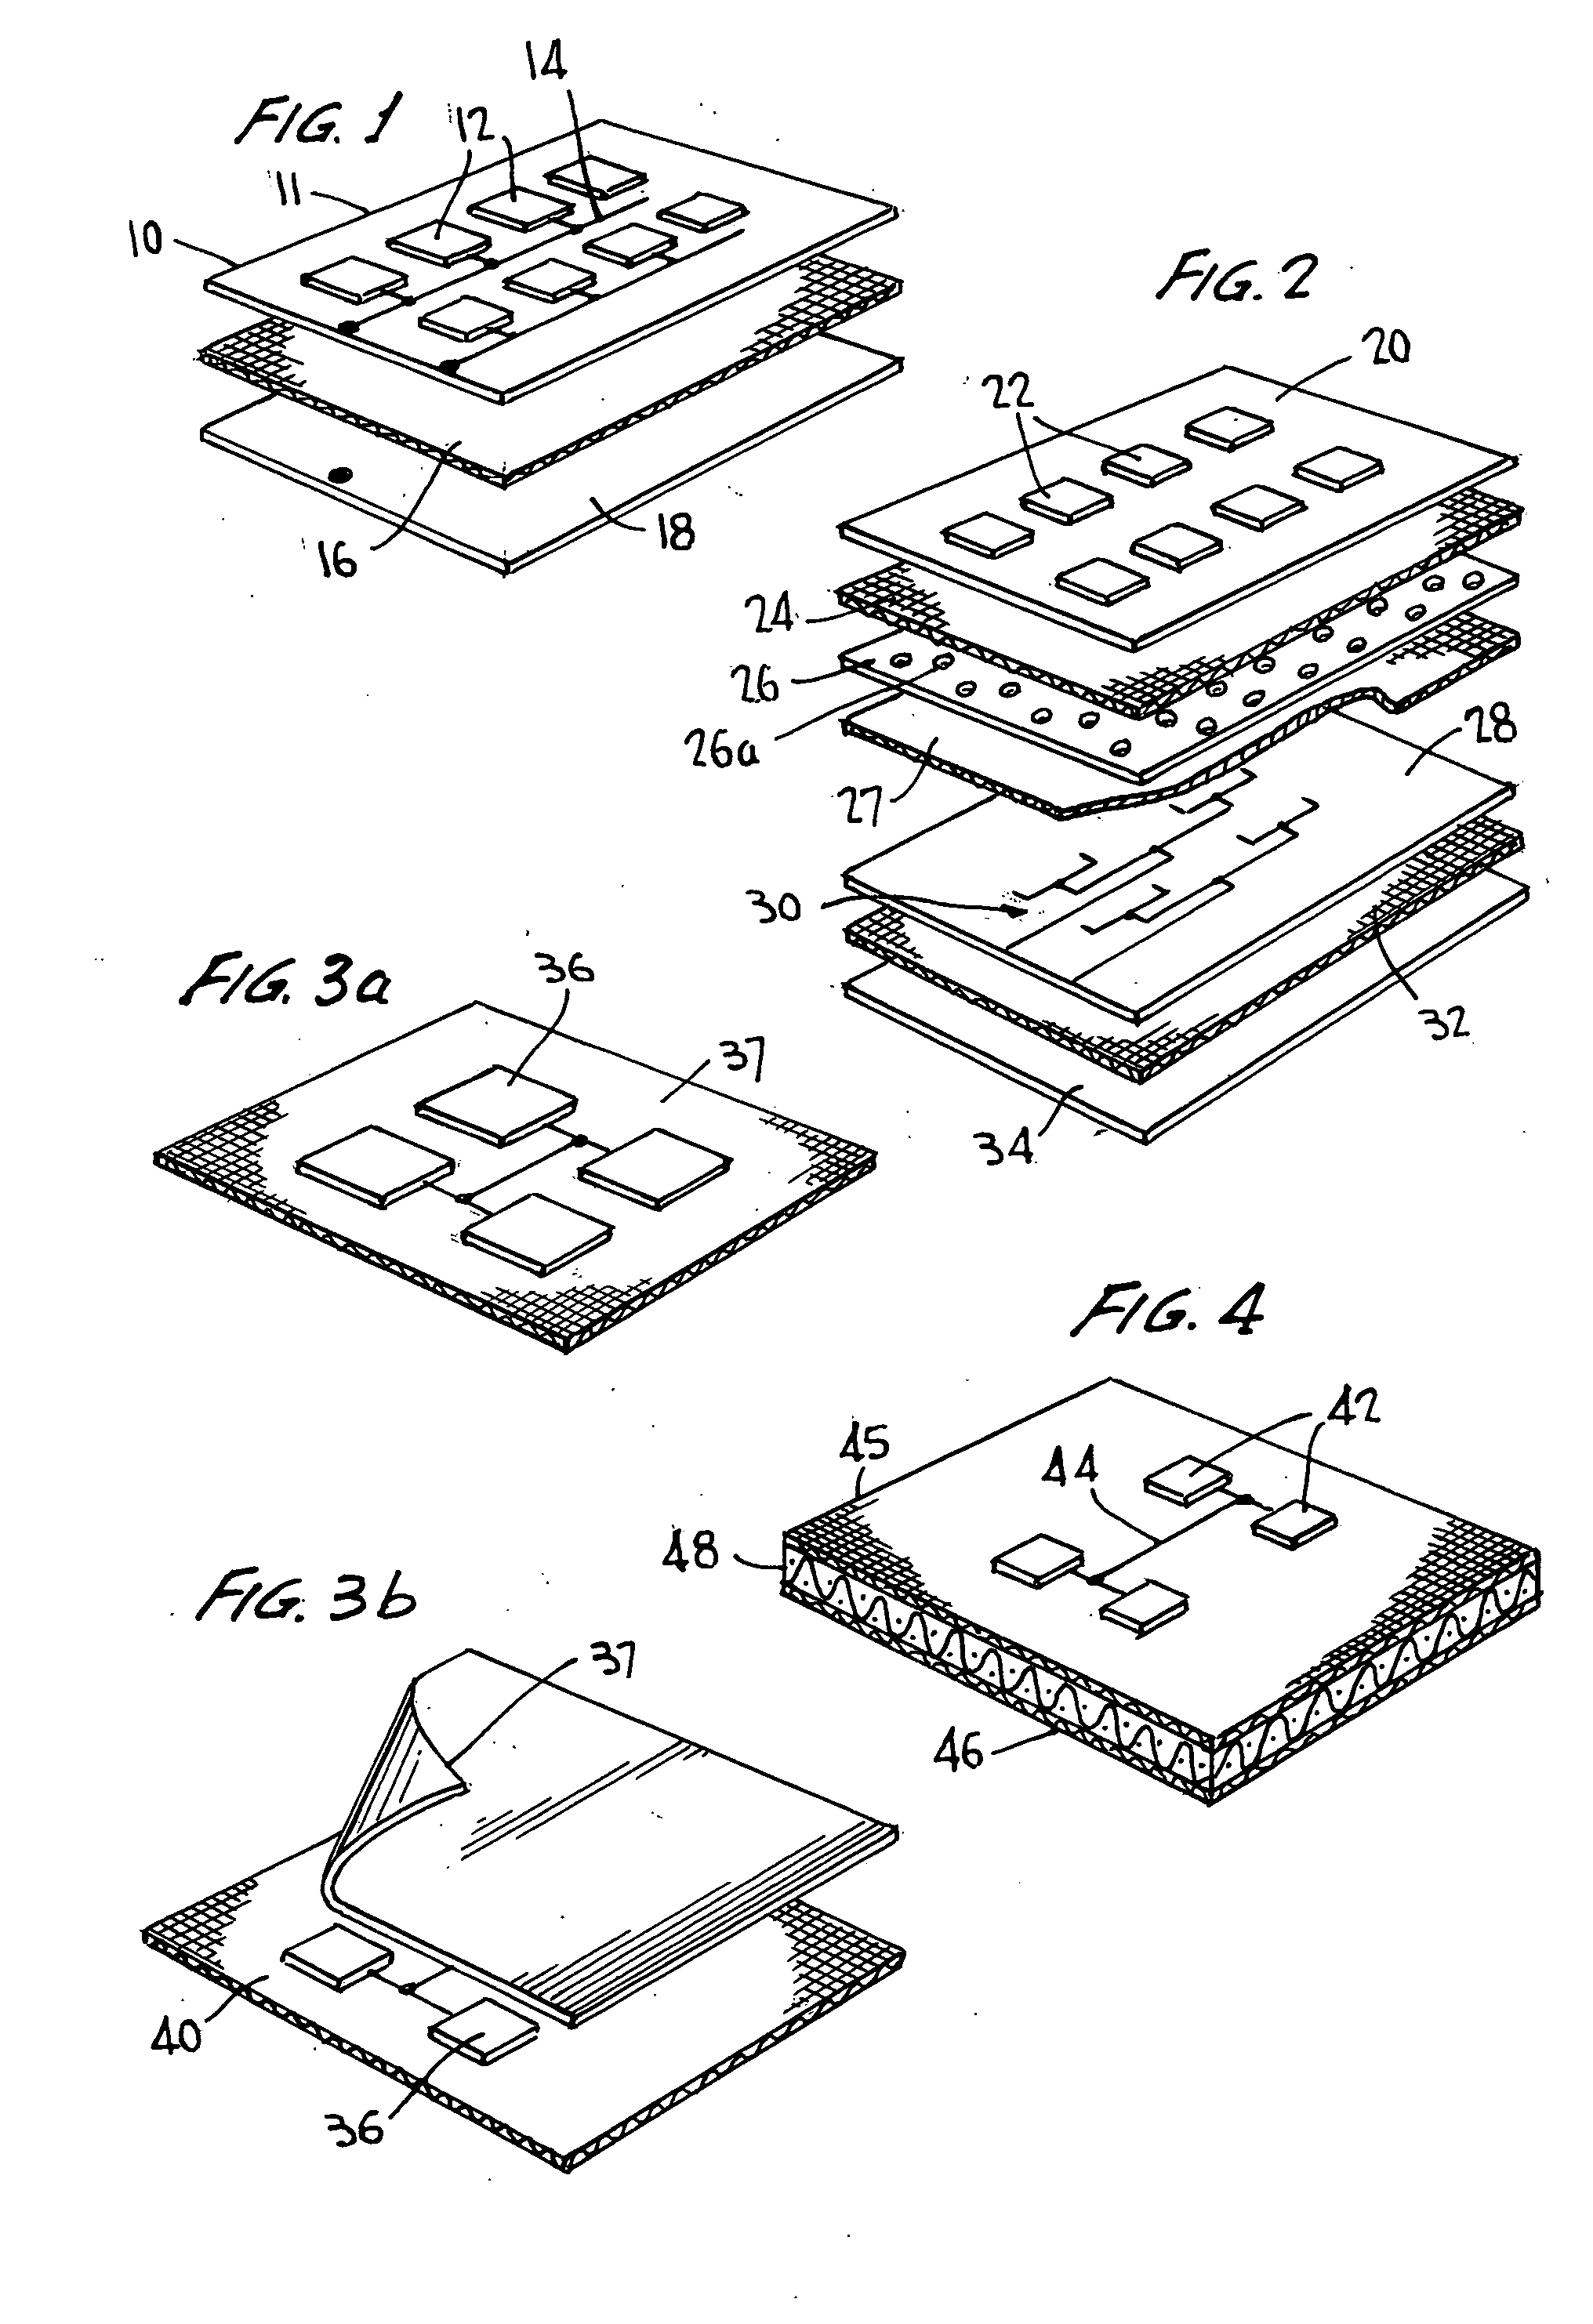 Method for constructing antennas from textile fabrics and components